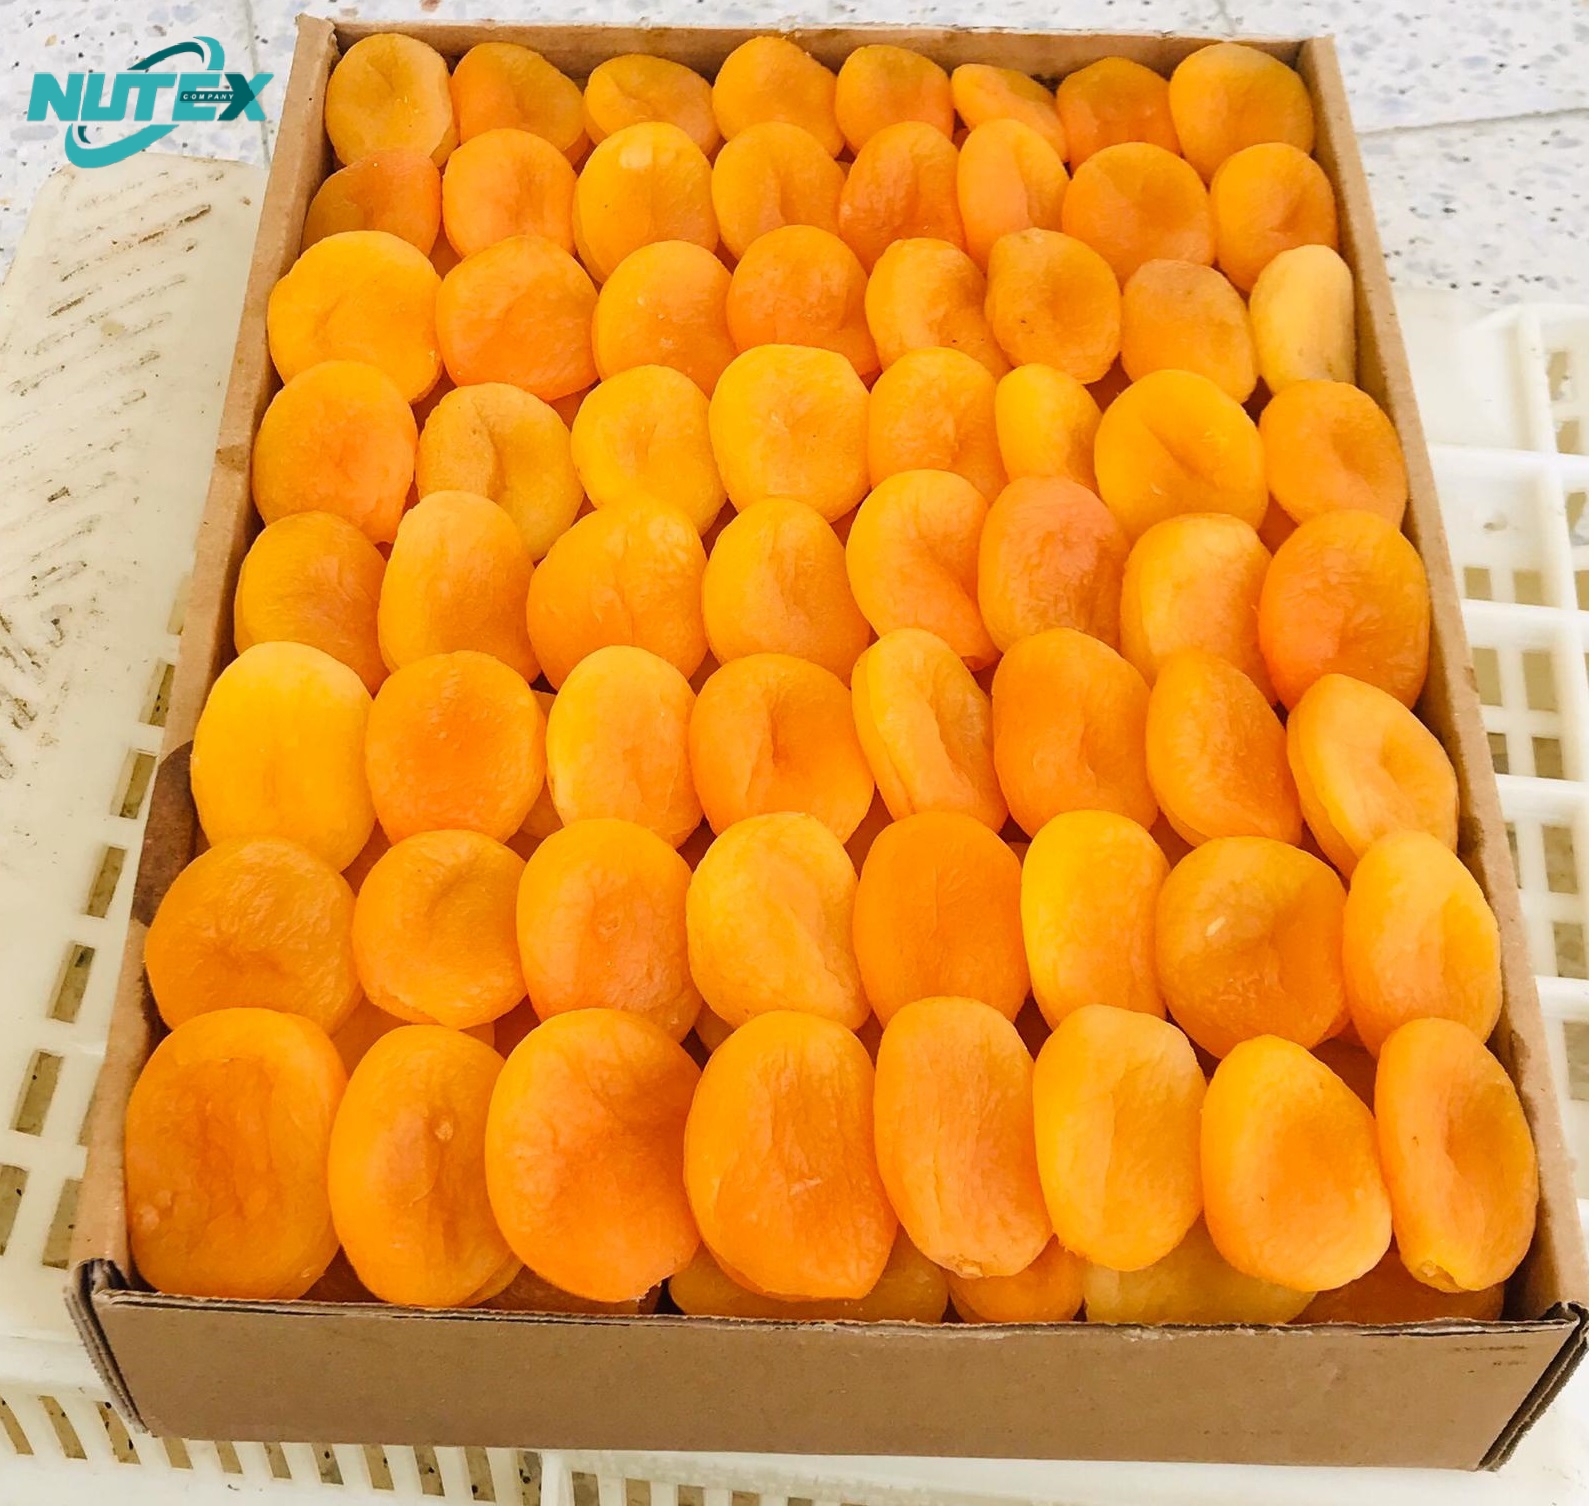  Sale and export of quality dried apricots_ Wholesale Dried Apricots - Dried Fruit Manufacturer_ Nutex Company